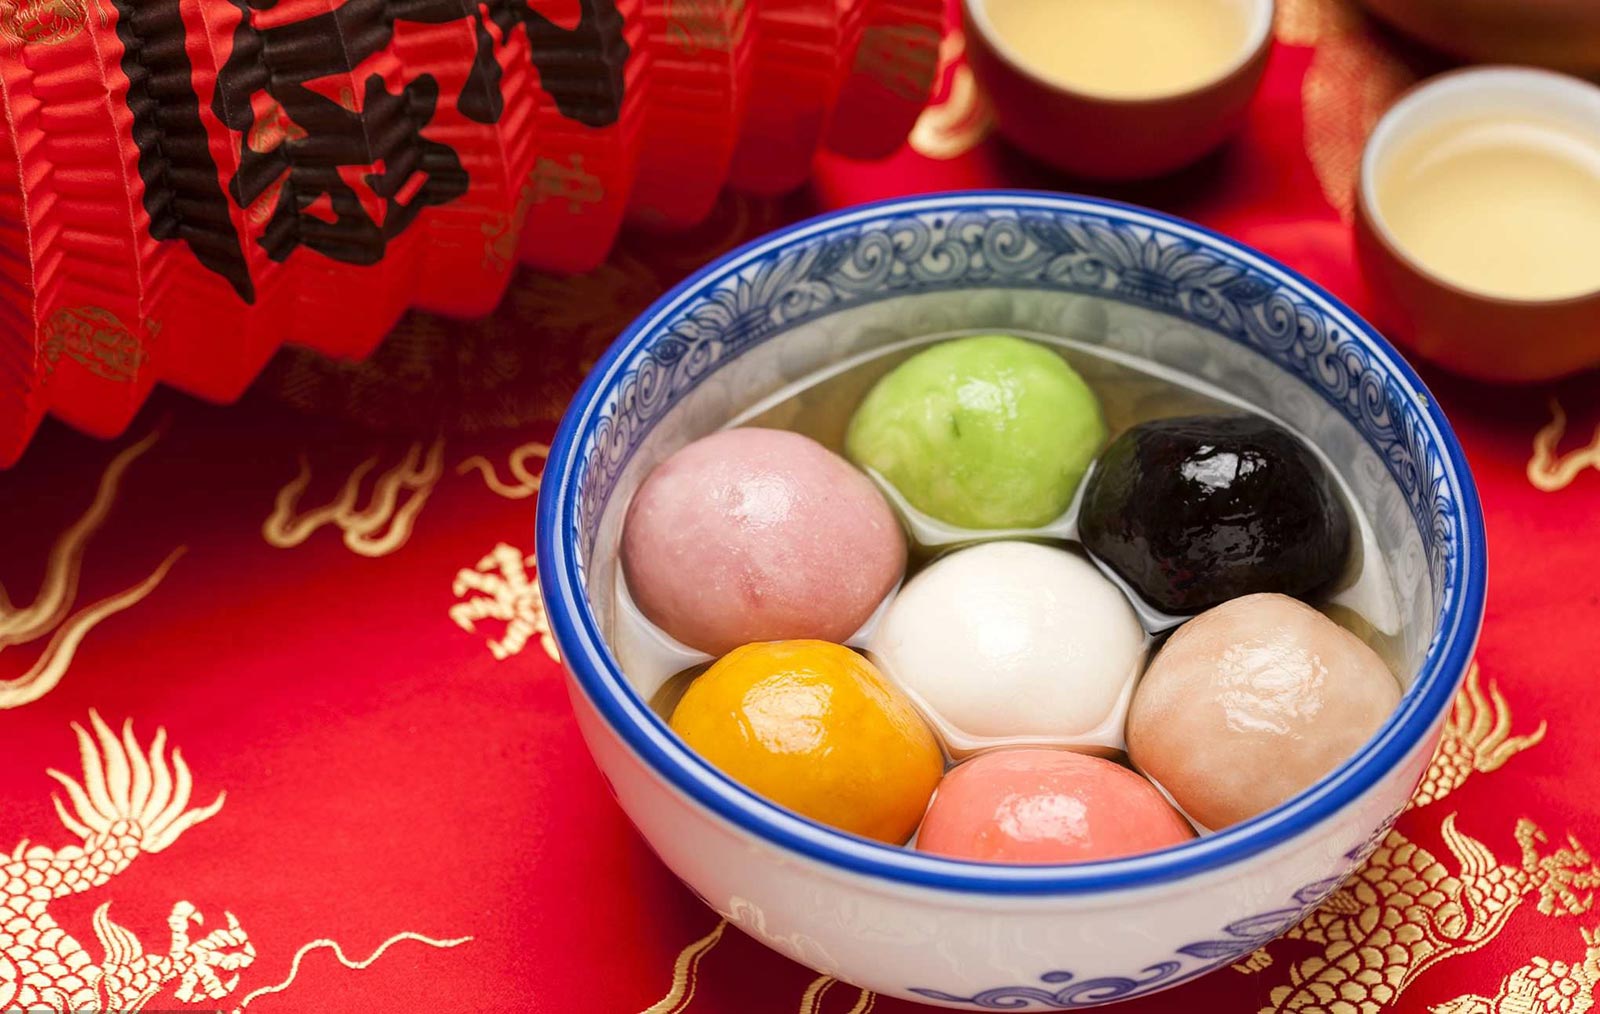 Chinese New Year Trivia Questions And Answers Tangyuan (Glutinous Rice Balls)